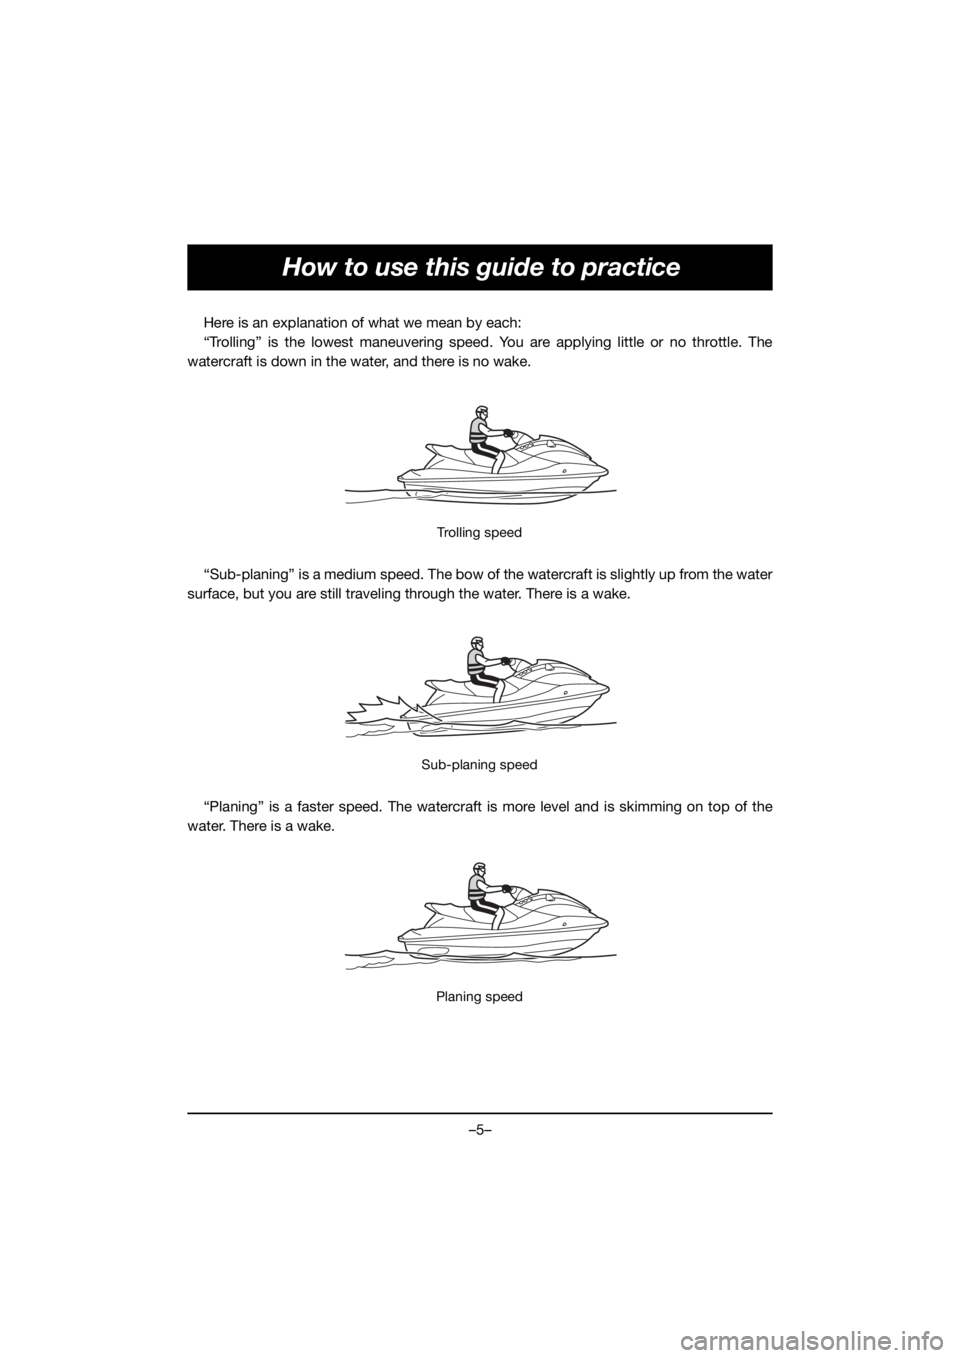 YAMAHA GP1800R SVHO 2021  Notices Demploi (in French) –5–
How to use this guide to practice
Here is an explanation of what we mean by each:
“Trolling” is the lowest maneuvering speed. You are applying little or no throttle. The
watercraft is down